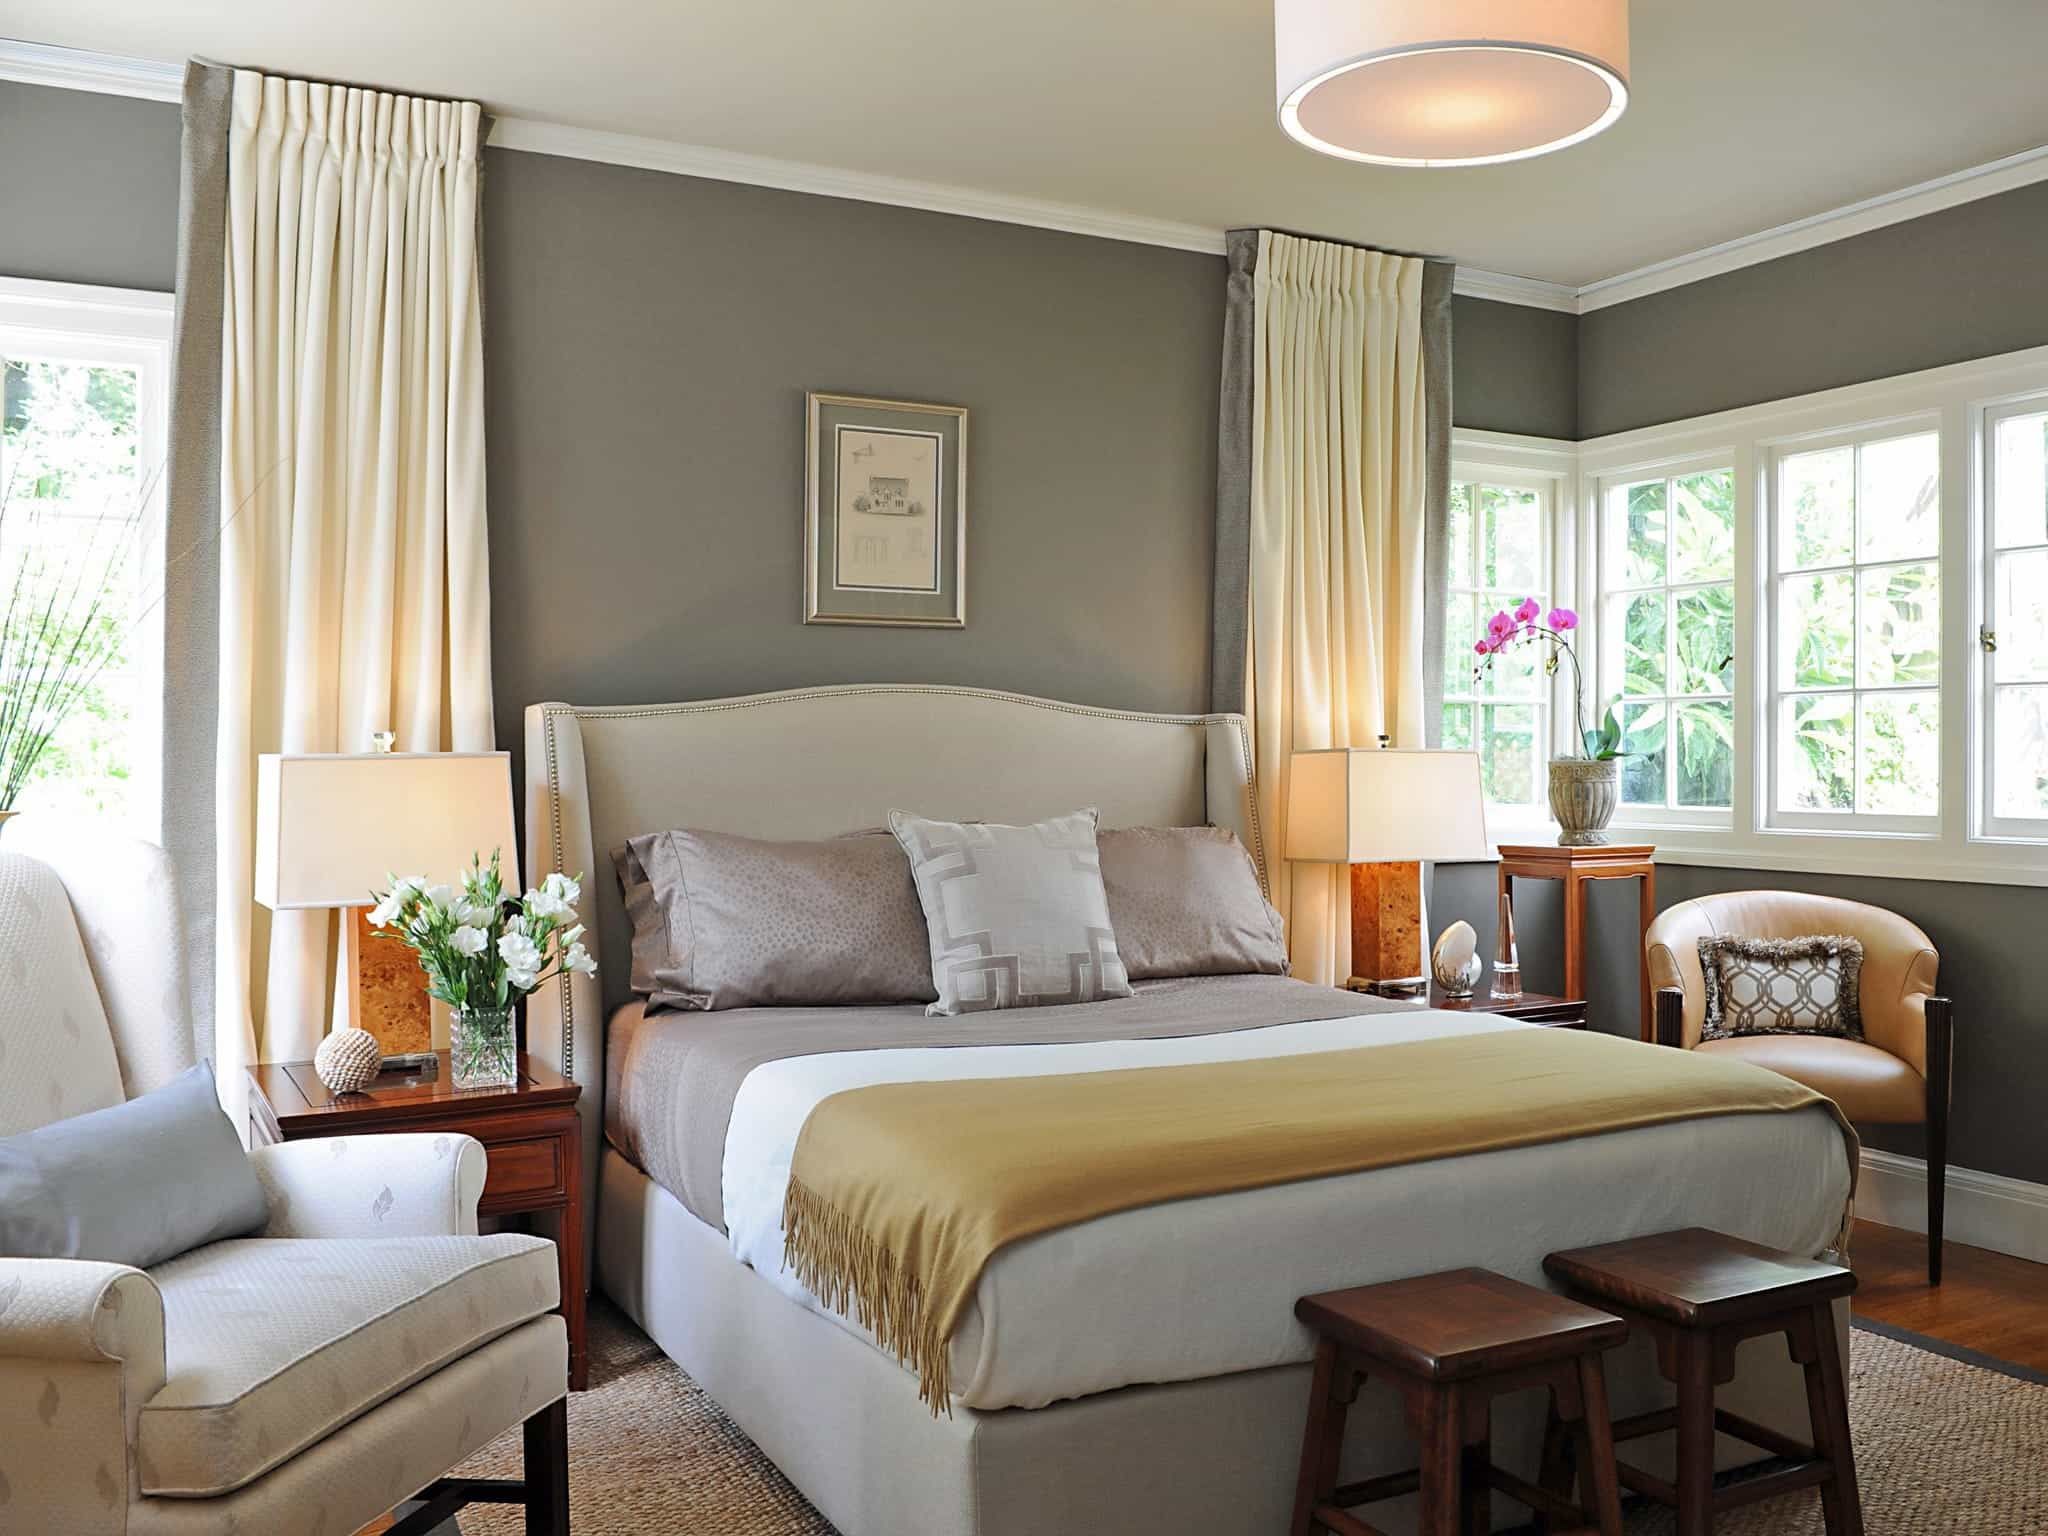 Traditional Gray Bedroom Decoration Features An Upholstered Headboard With Modern Lighting And Wood Accent Furniture (View 4 of 28)